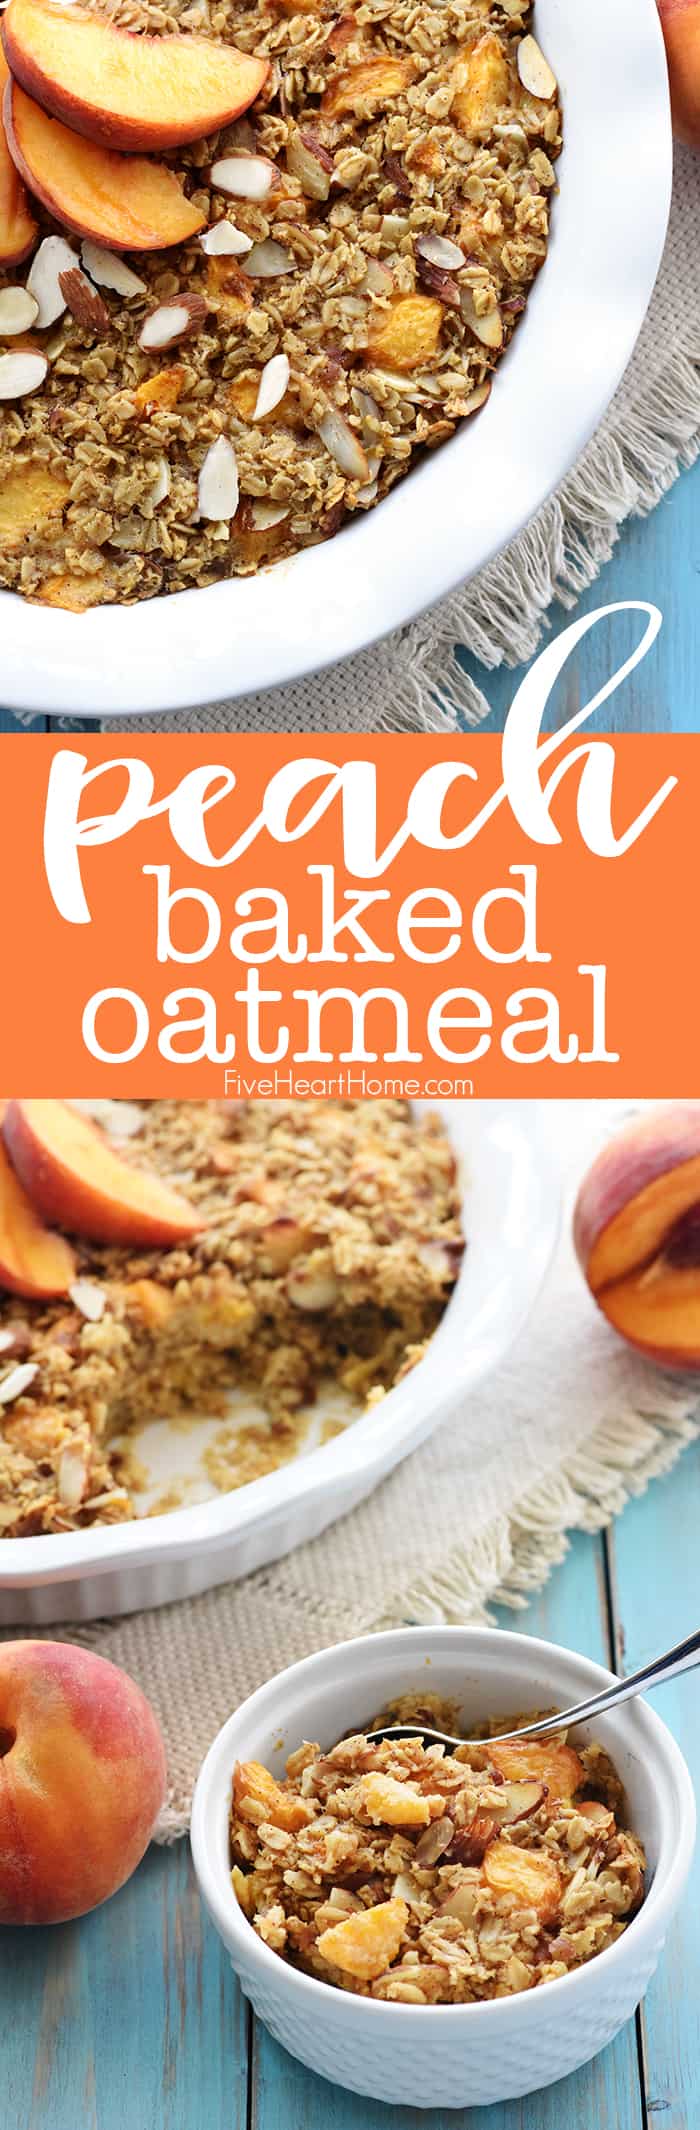 Peach Baked Oatmeal ~ this wholesome and delicious recipe is bursting with healthy, real food ingredients for a make-ahead breakfast that will fuel you through the morning! | FiveHeartHome.com via @fivehearthome